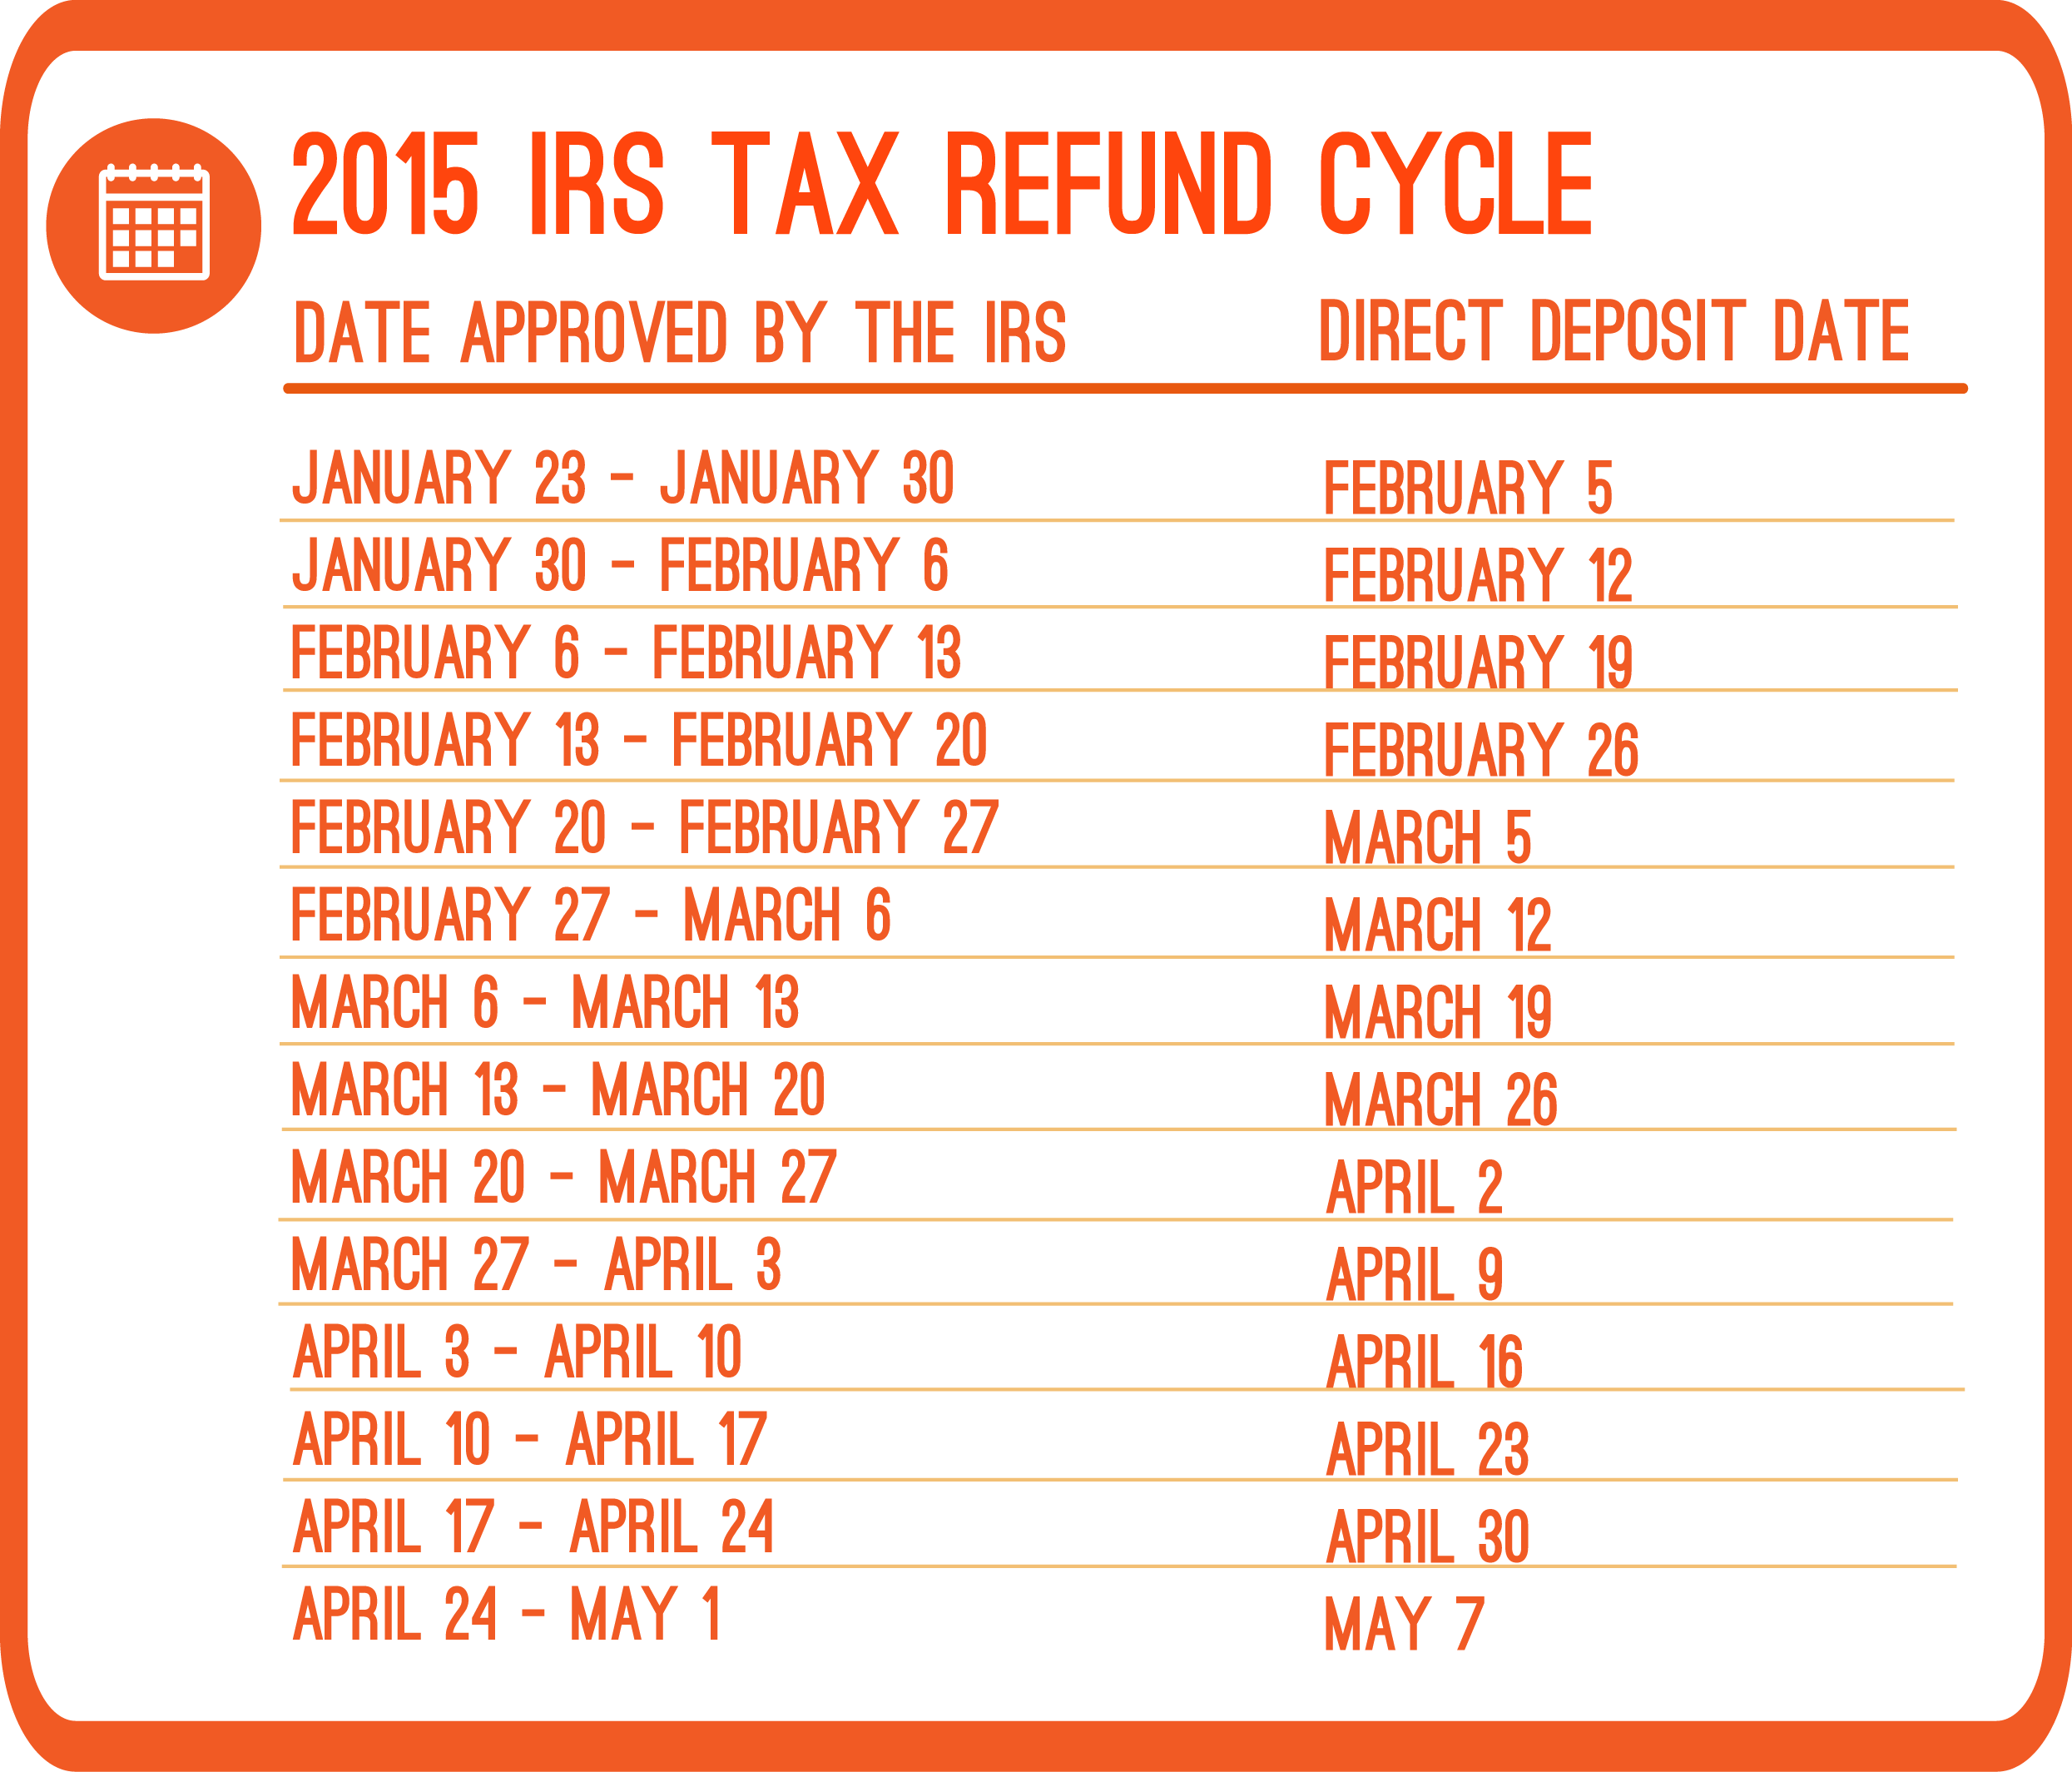 Irs Refund Cycle Chart